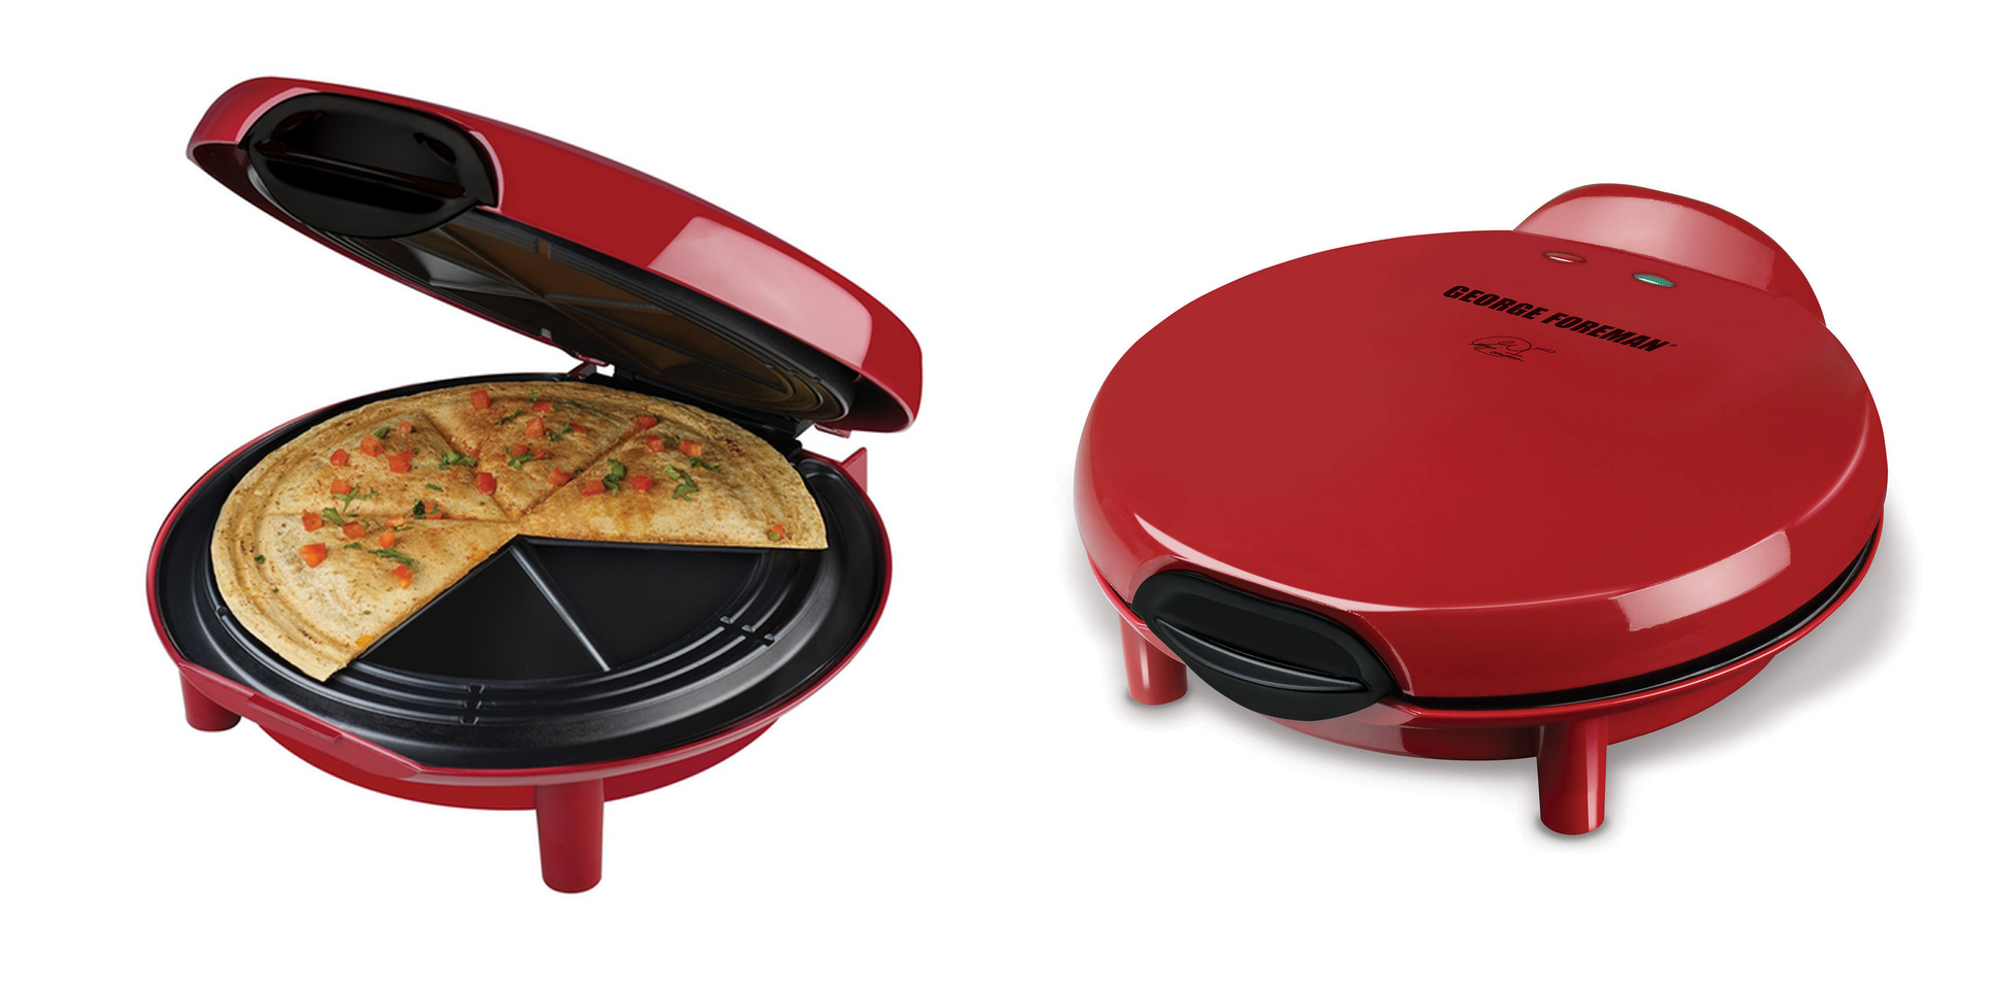 George Foreman Quesadilla Maker returns to  low at $14 Prime shipped